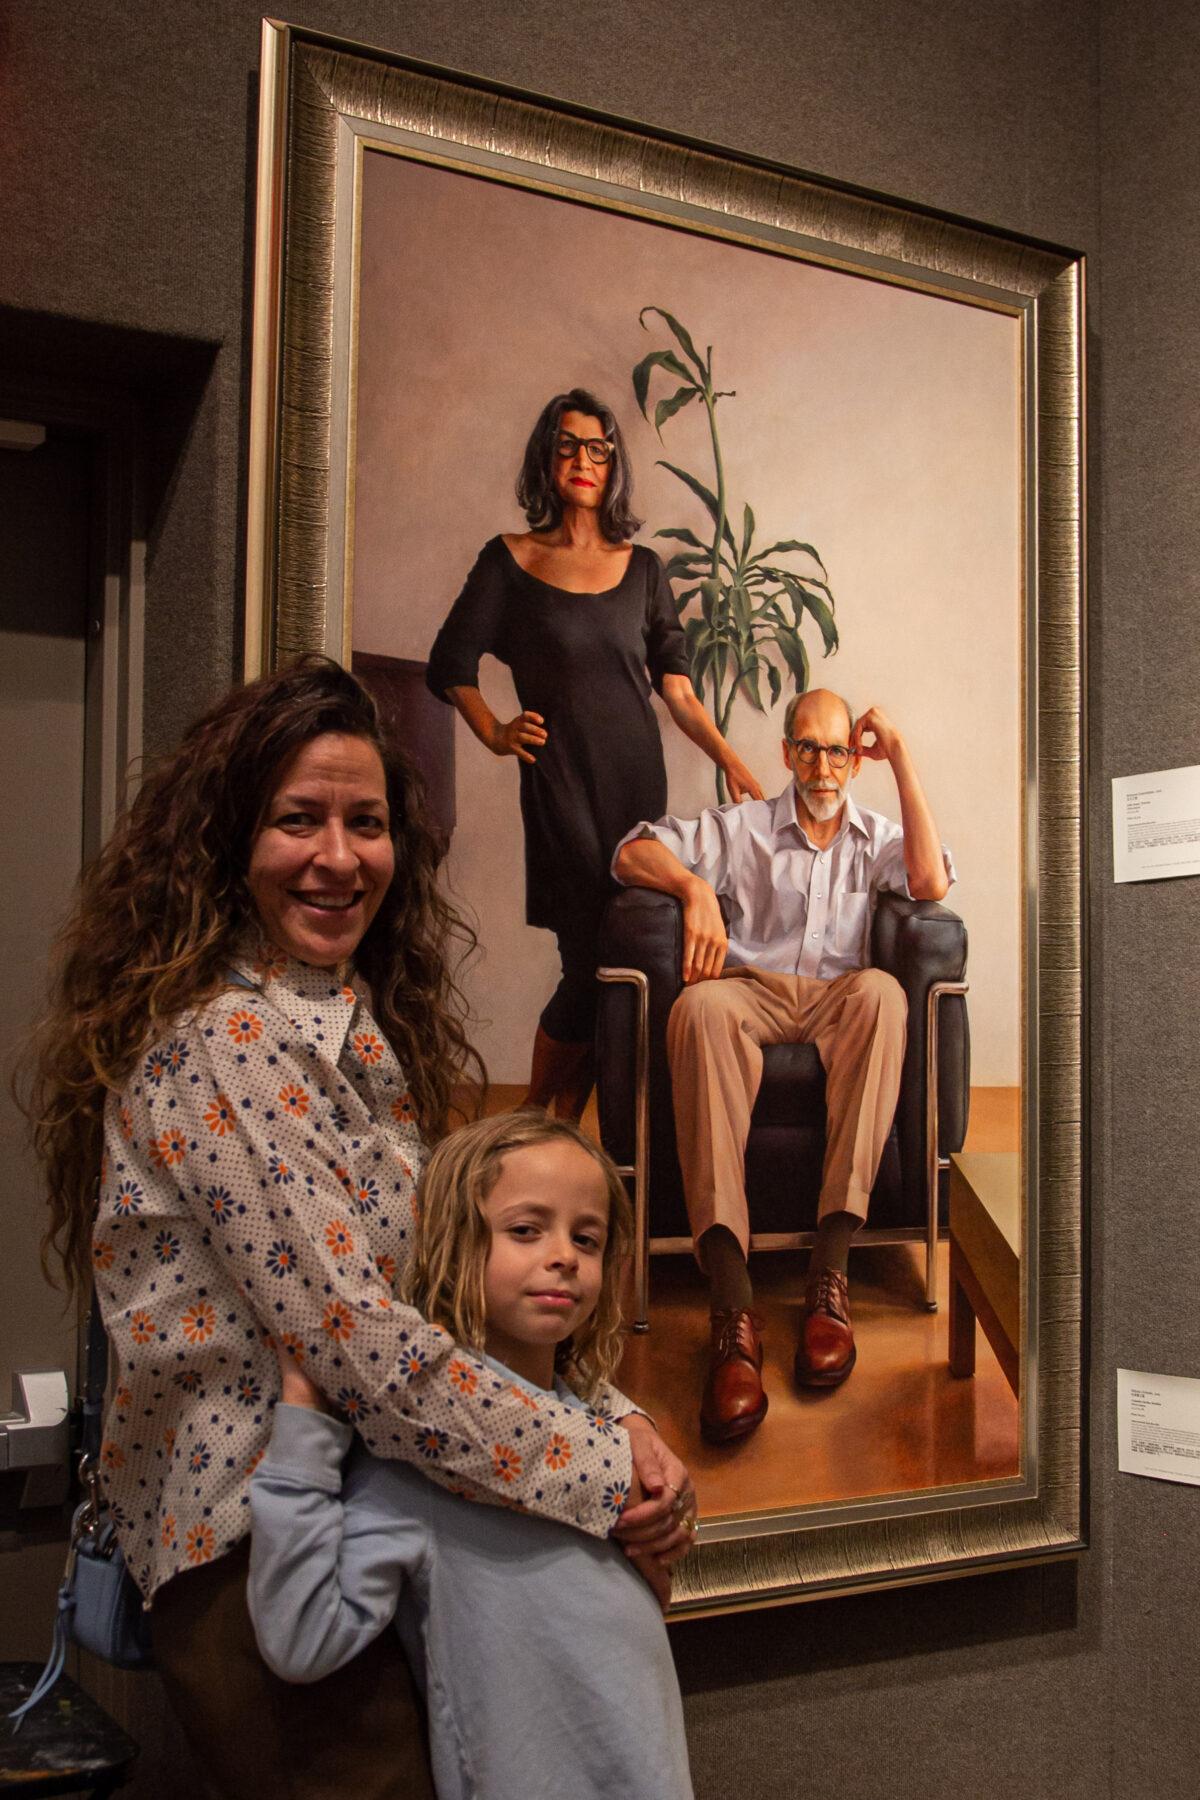 Family members of Ken Goshen with his work "The Pause" at the 5th NTD International Figure Painting Competition exhibition at the Salmagundi Club in New York on Nov. 26, 2019. (Chung I Ho/The Epoch Times)